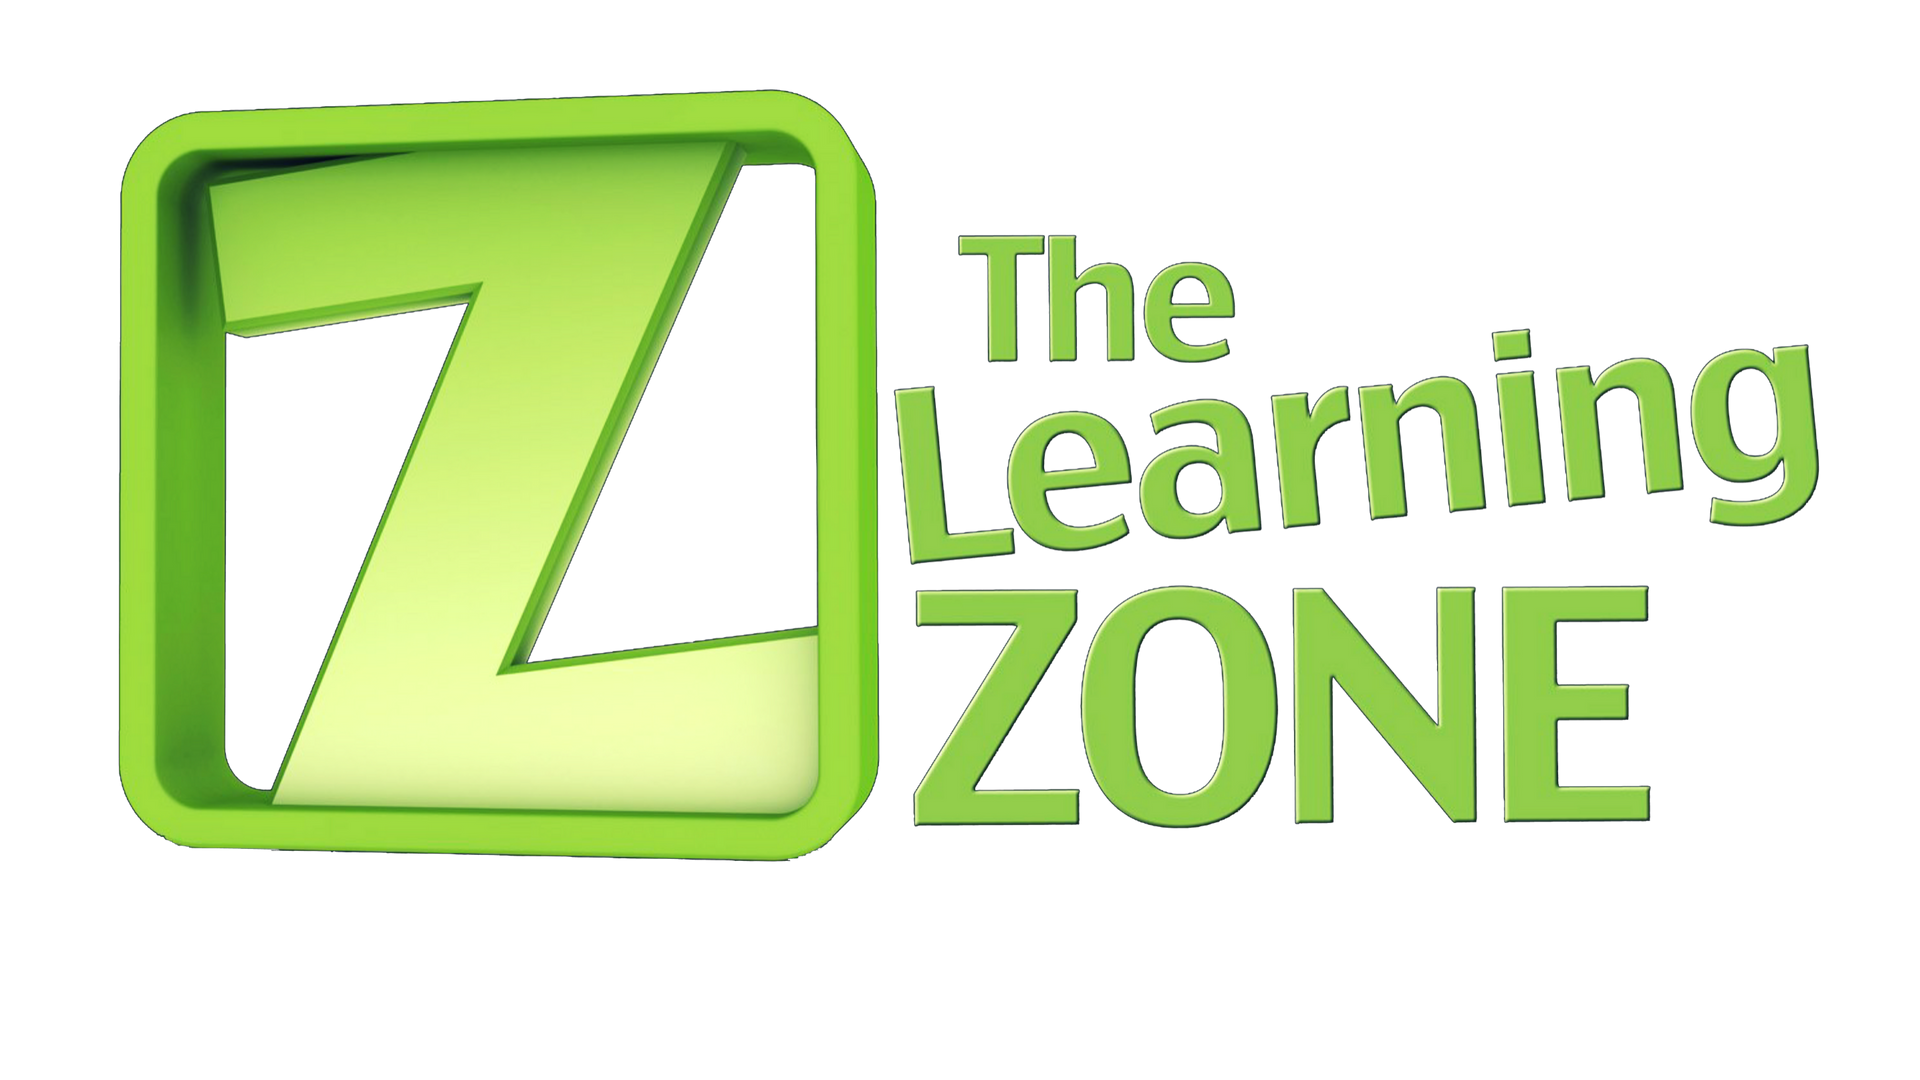 The Learning Zone